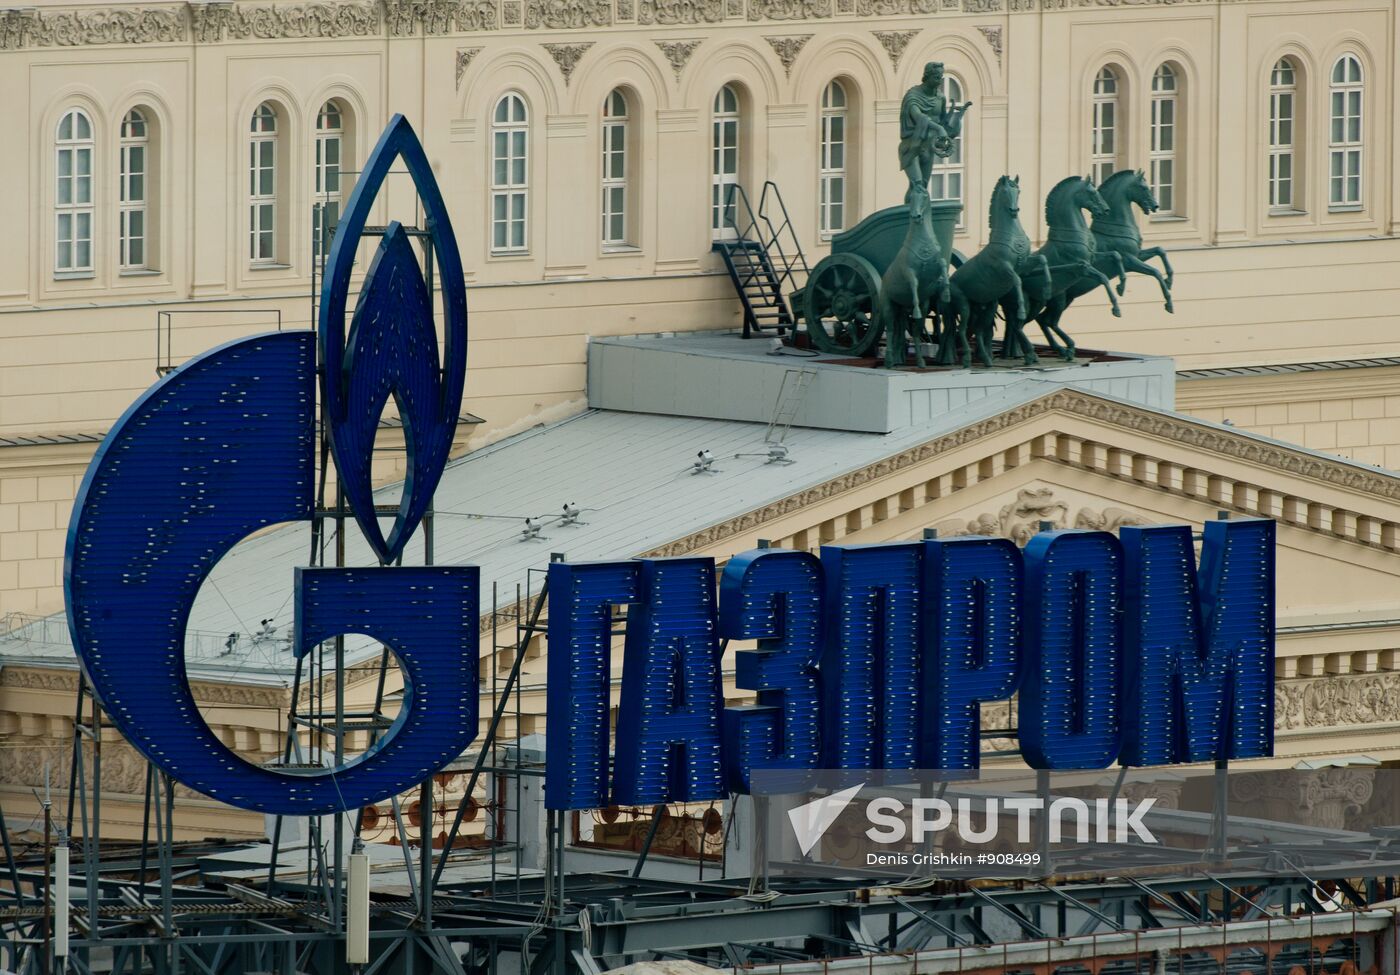 Gazprom advertisement in the center of Moscow